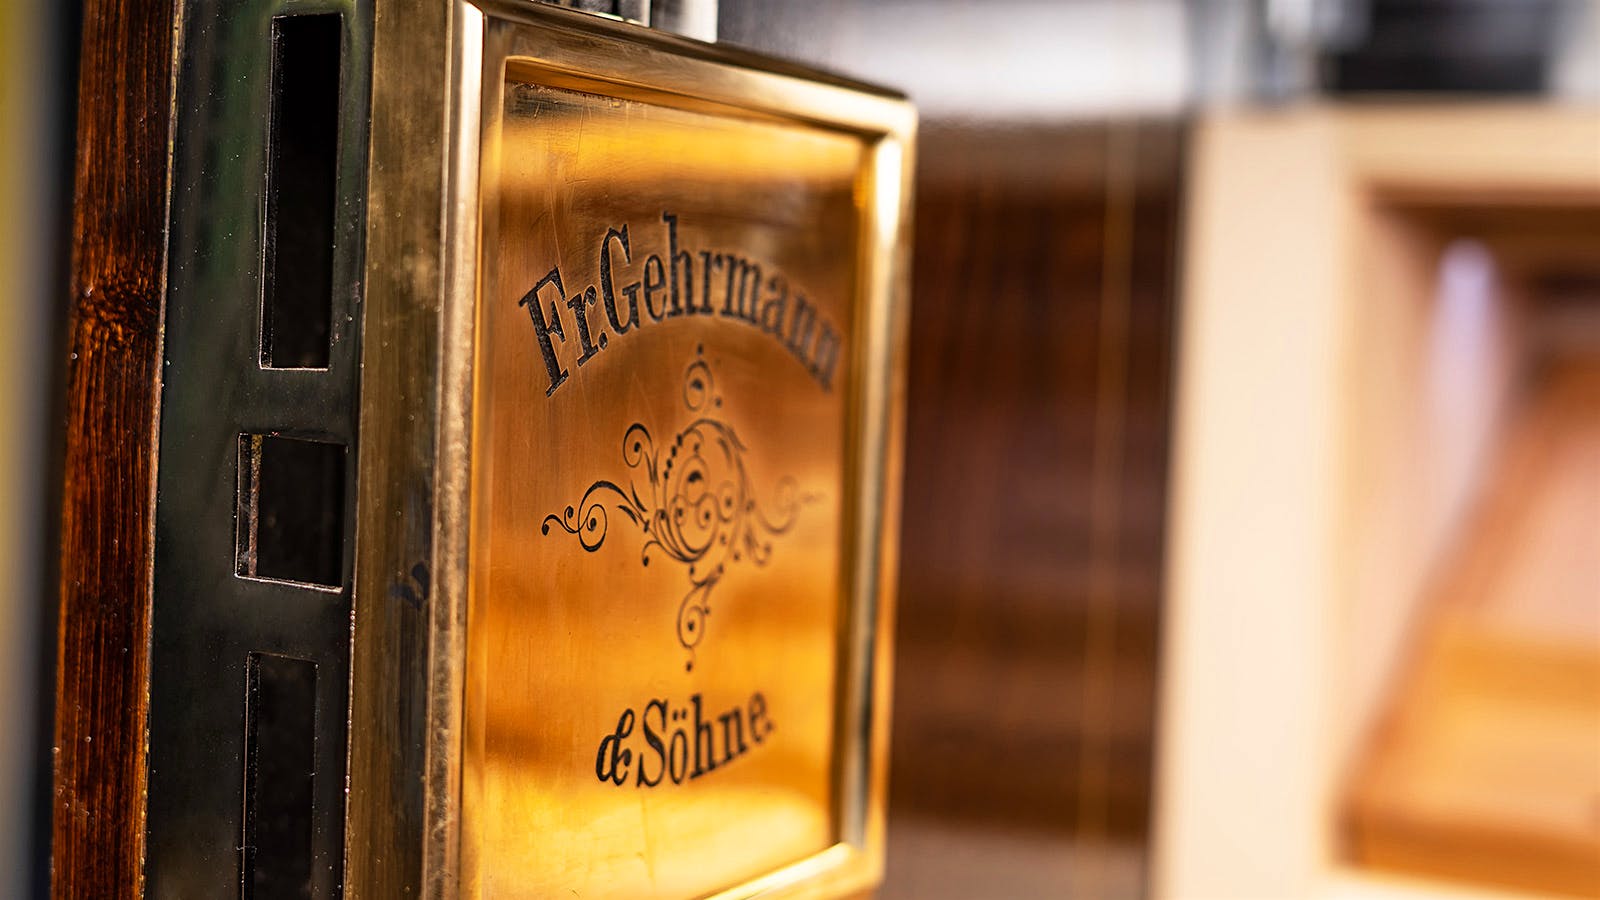 The insignia on one of the locks reads Fr. Gehrmann and Söhne, presumably the company that built the original safe.